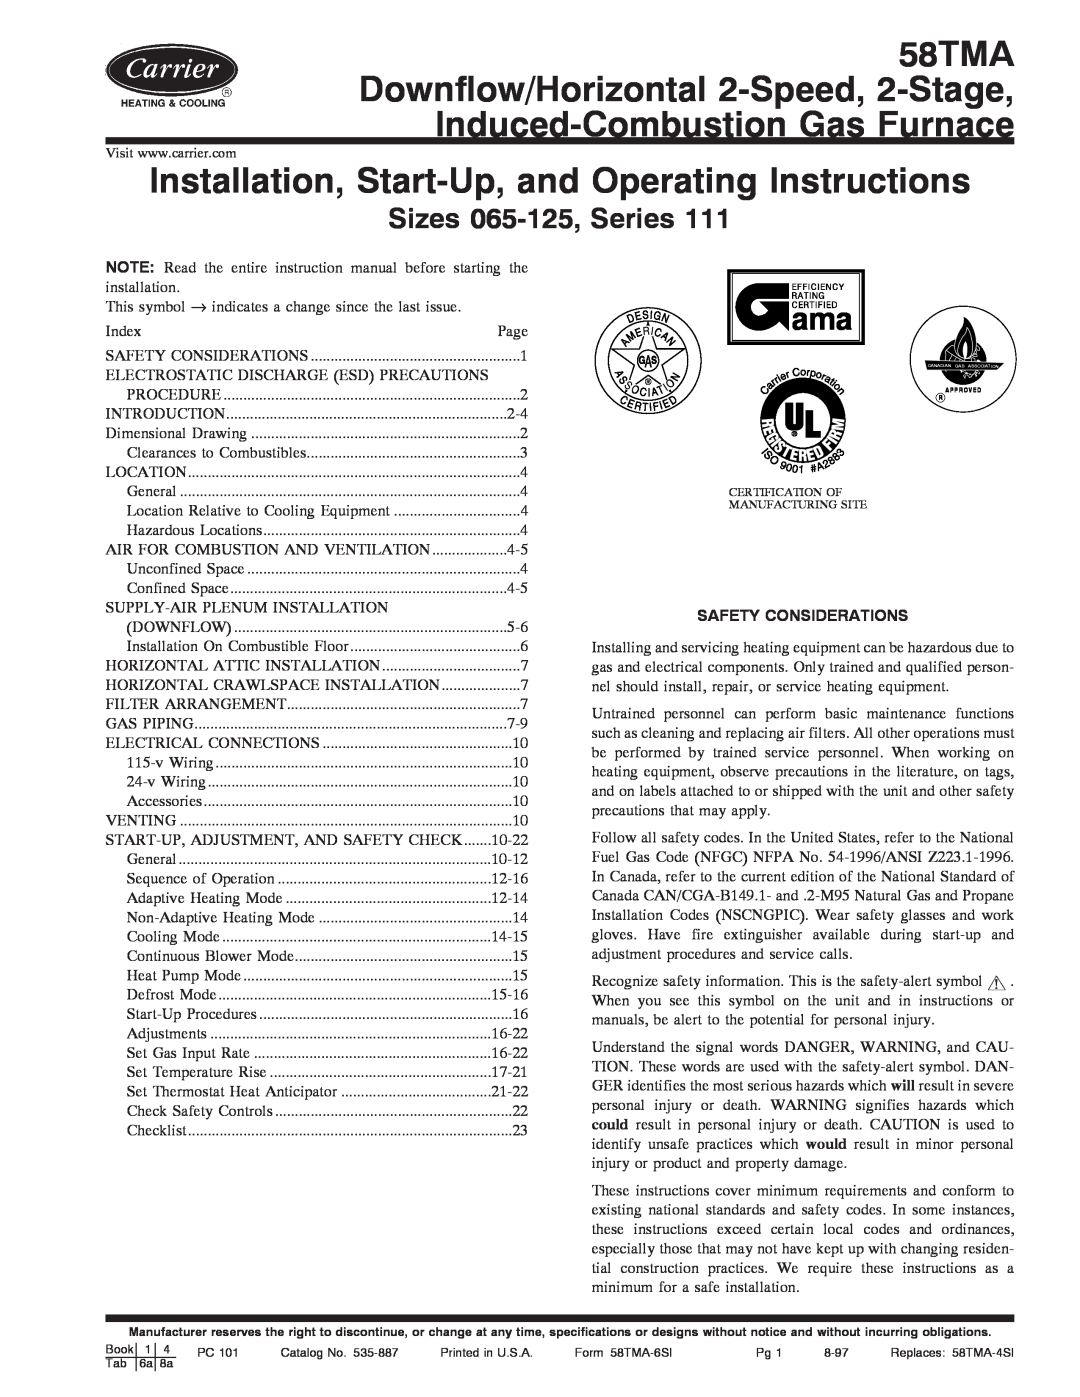 Carrier 58TMA operating instructions Installation, Start-Up,and Operating Instructions, Sizes 065-125,Series 